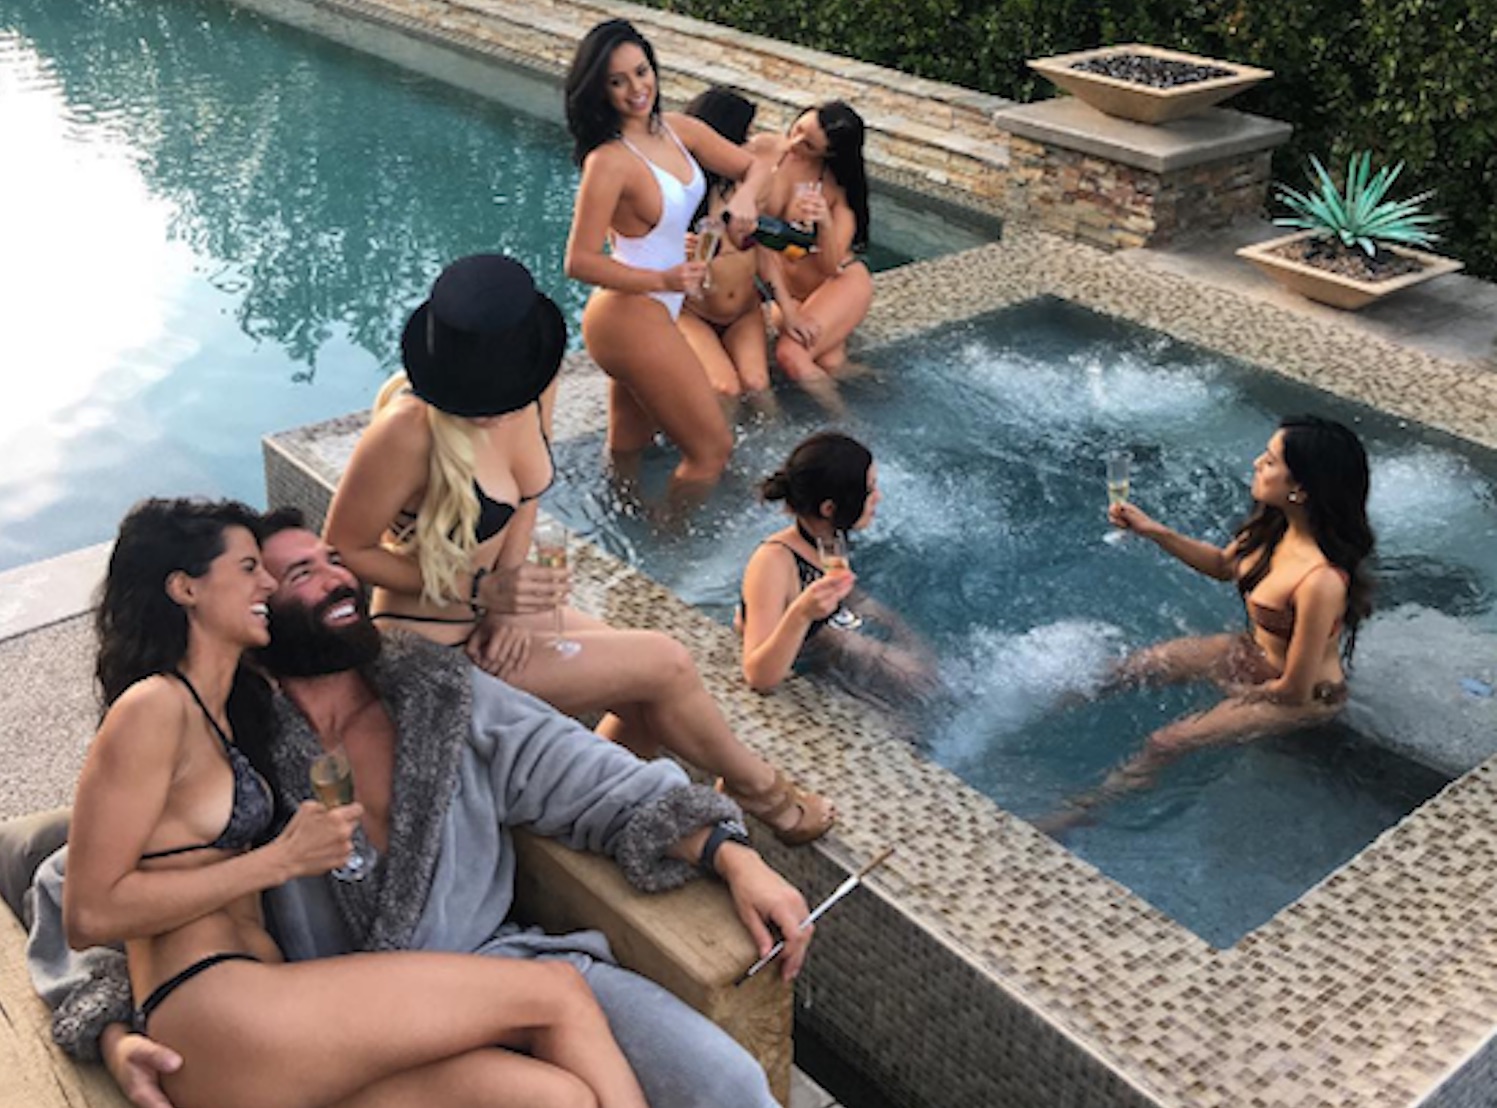 Real Pool Party - Dan Bilzerian Just Live Streamed His Party And It's Pretty ...